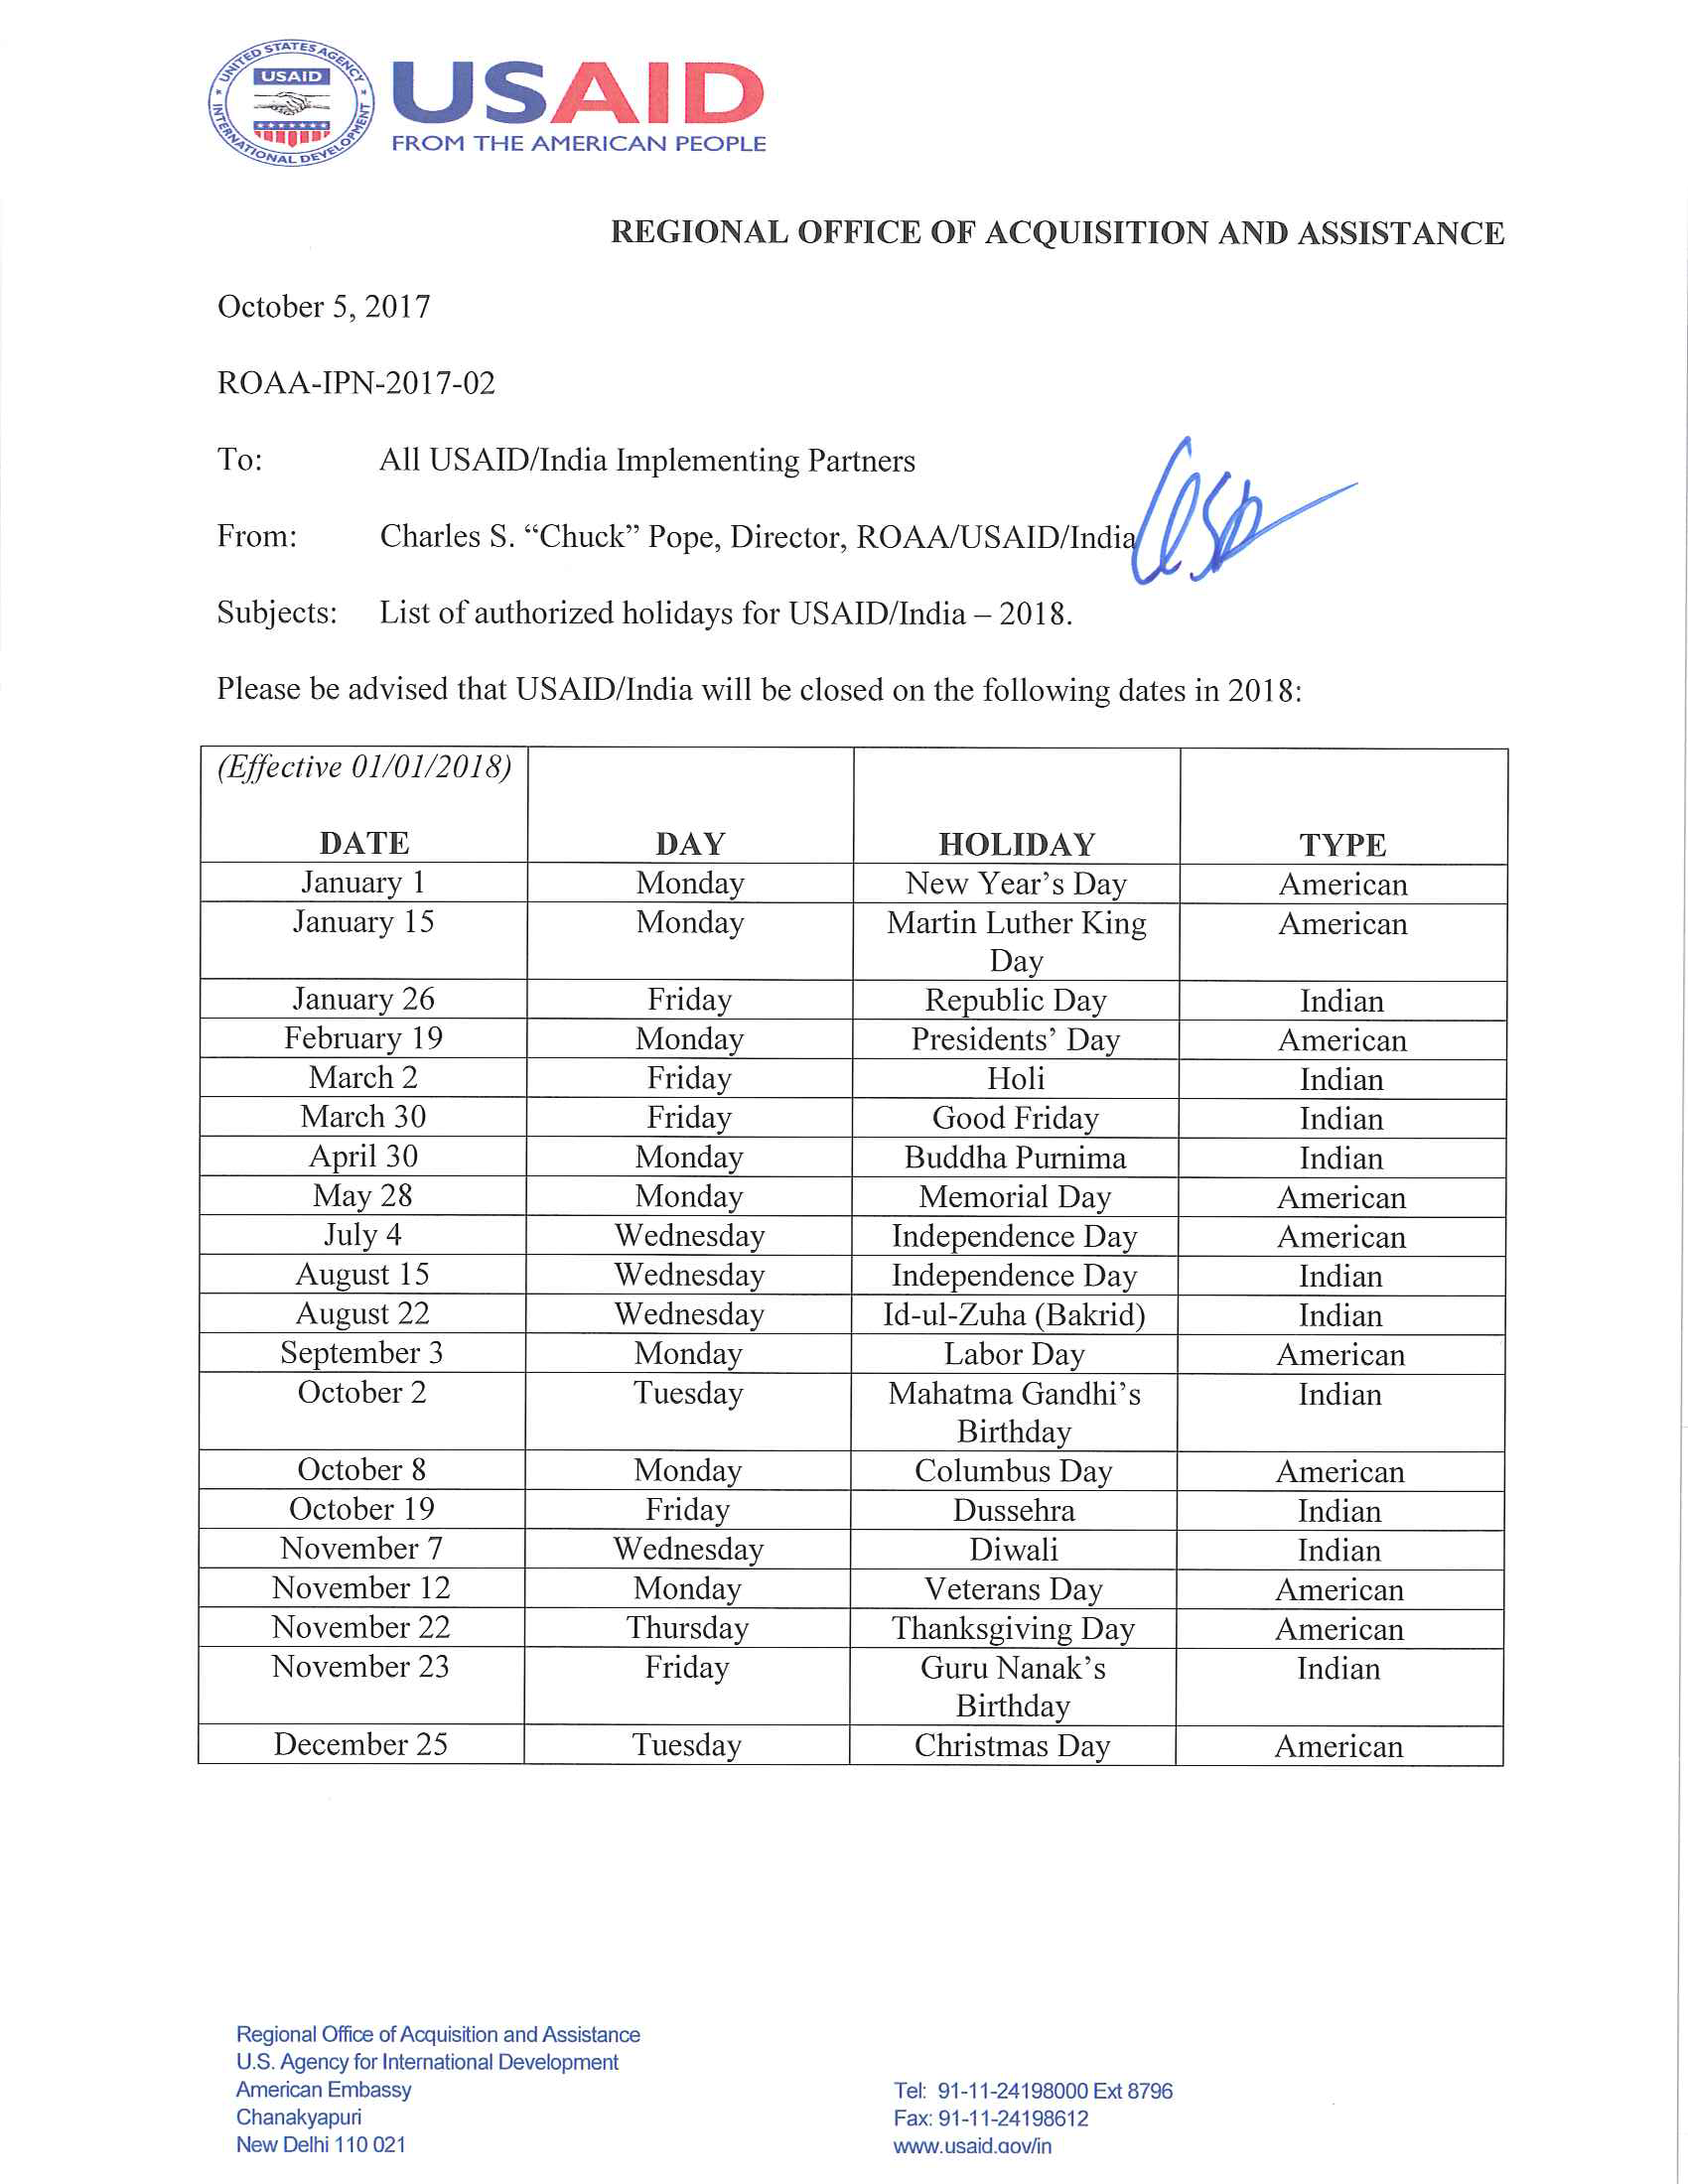 IPN 2 - List of Authorized Holidays for 2018